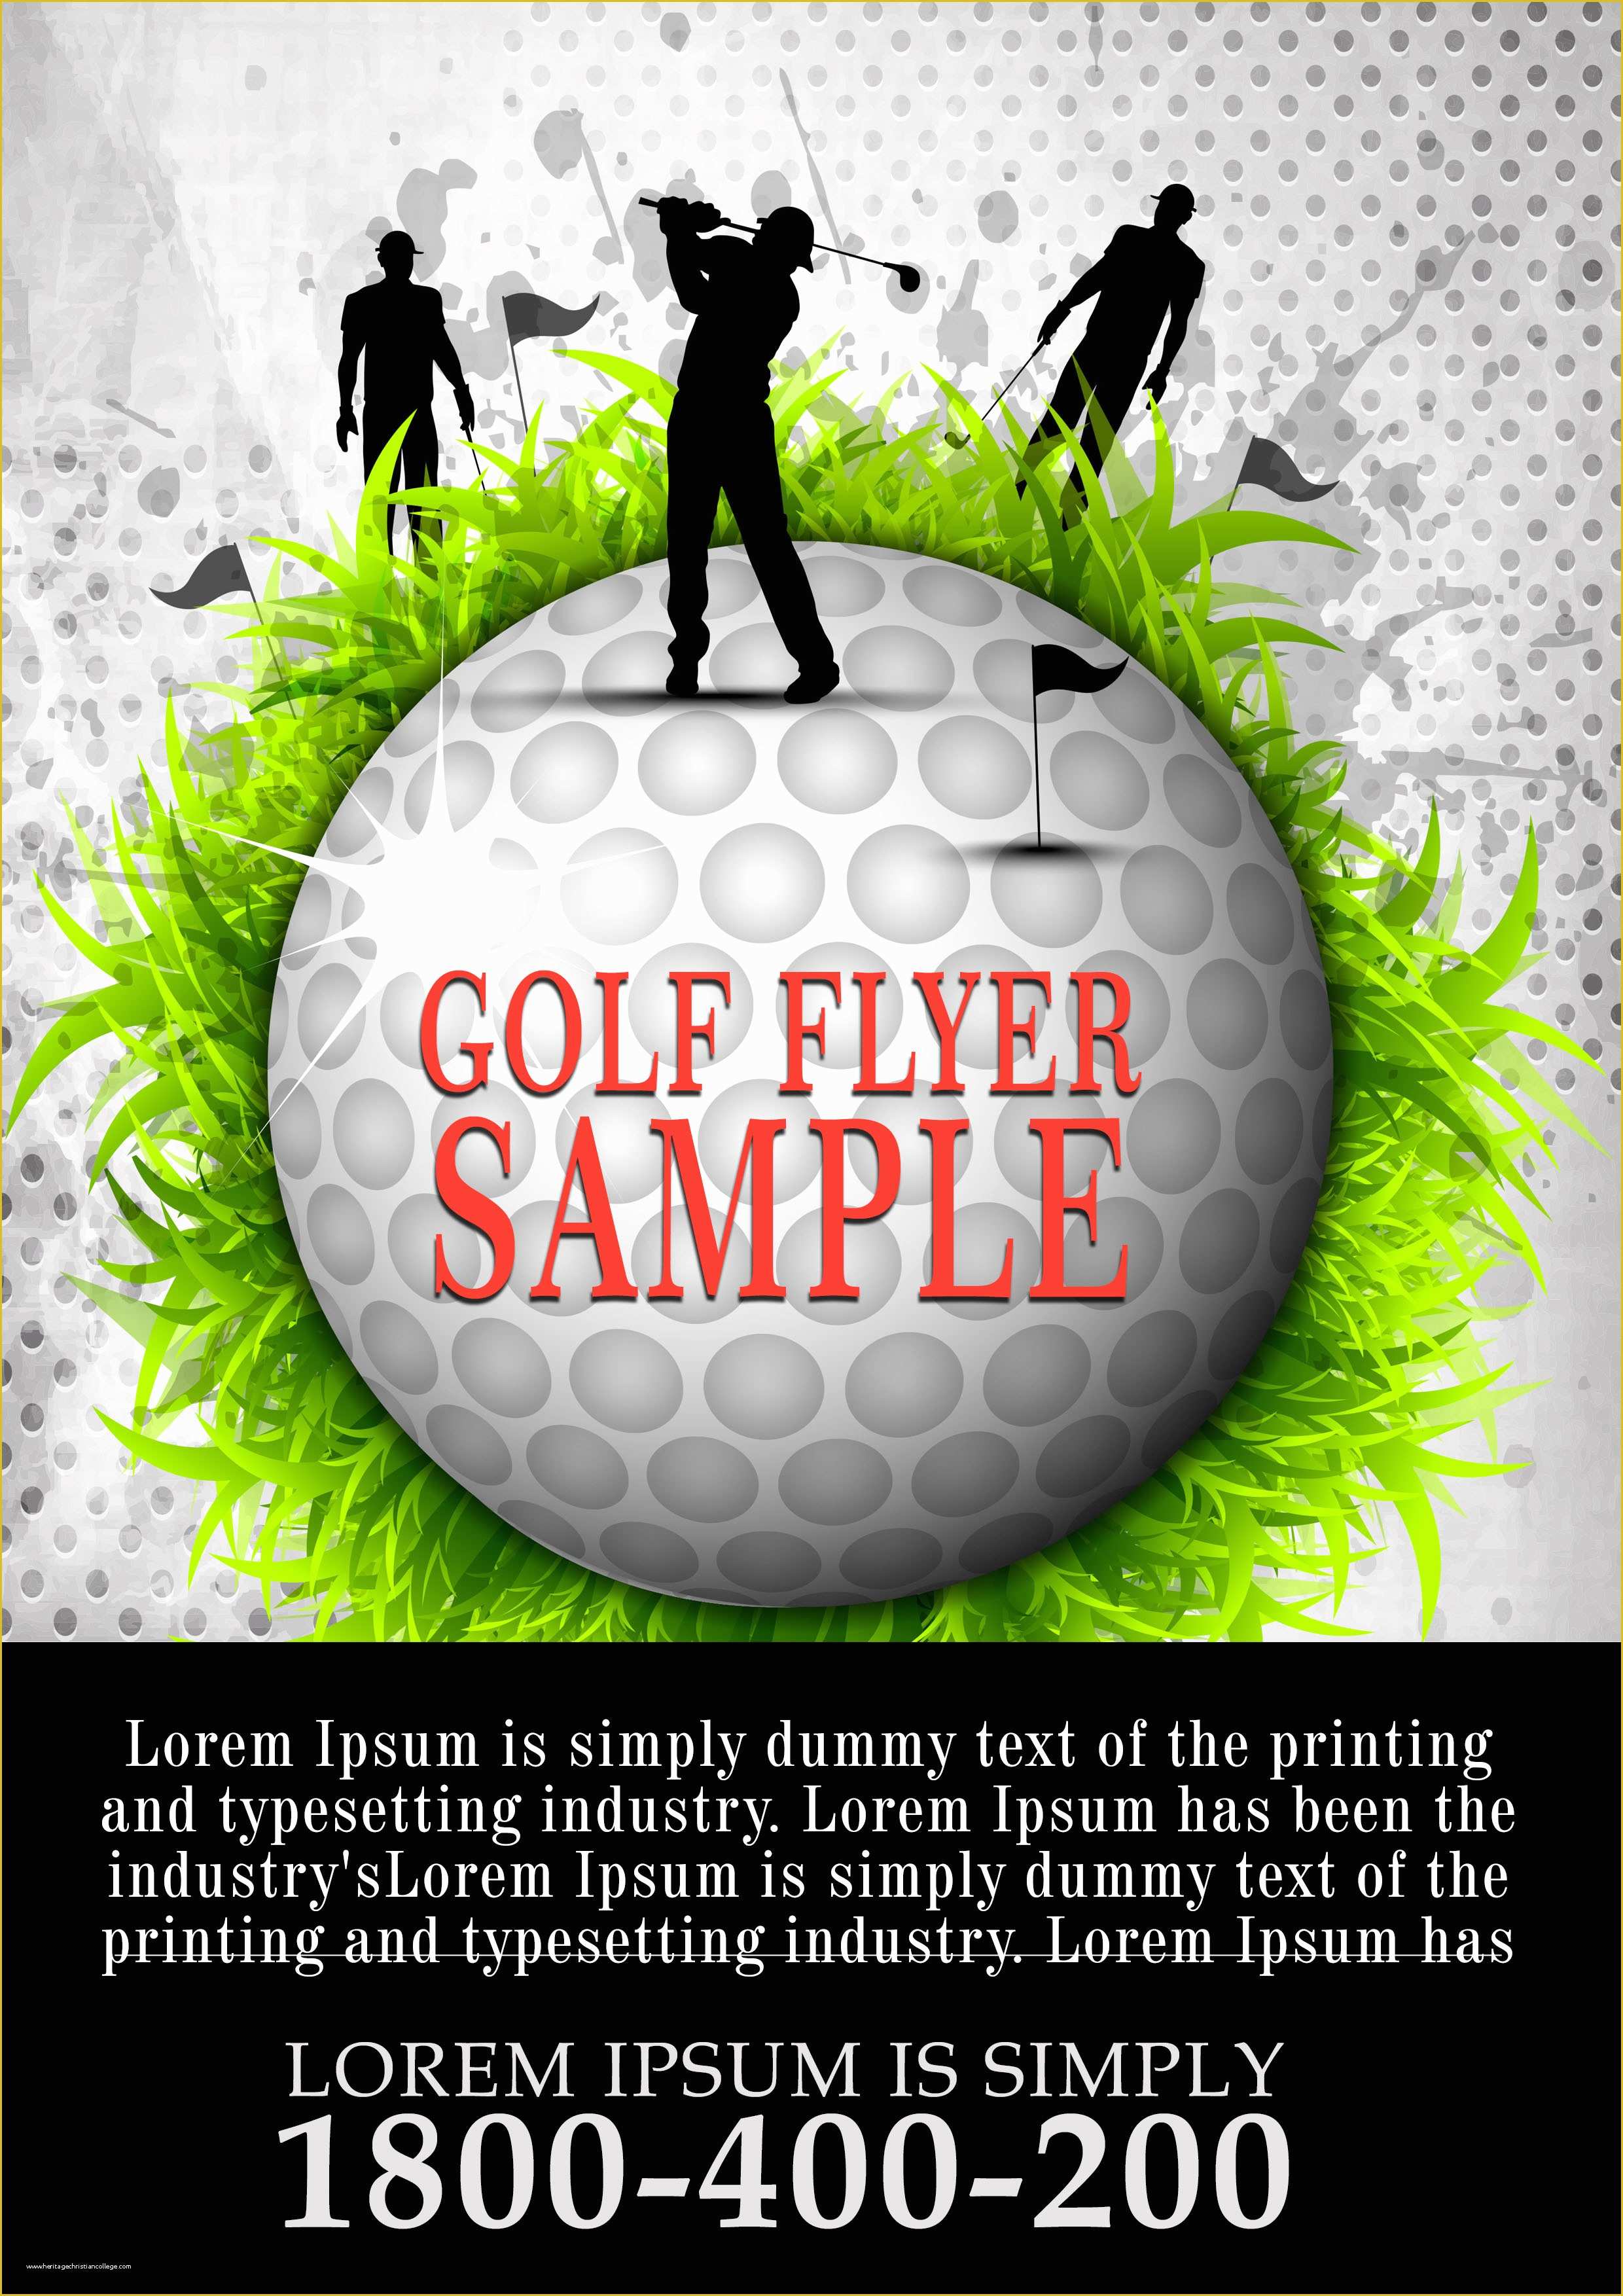 Golf tournament Flyer Template Download Free Of 15 Free Golf tournament Flyer Templates Fundraiser